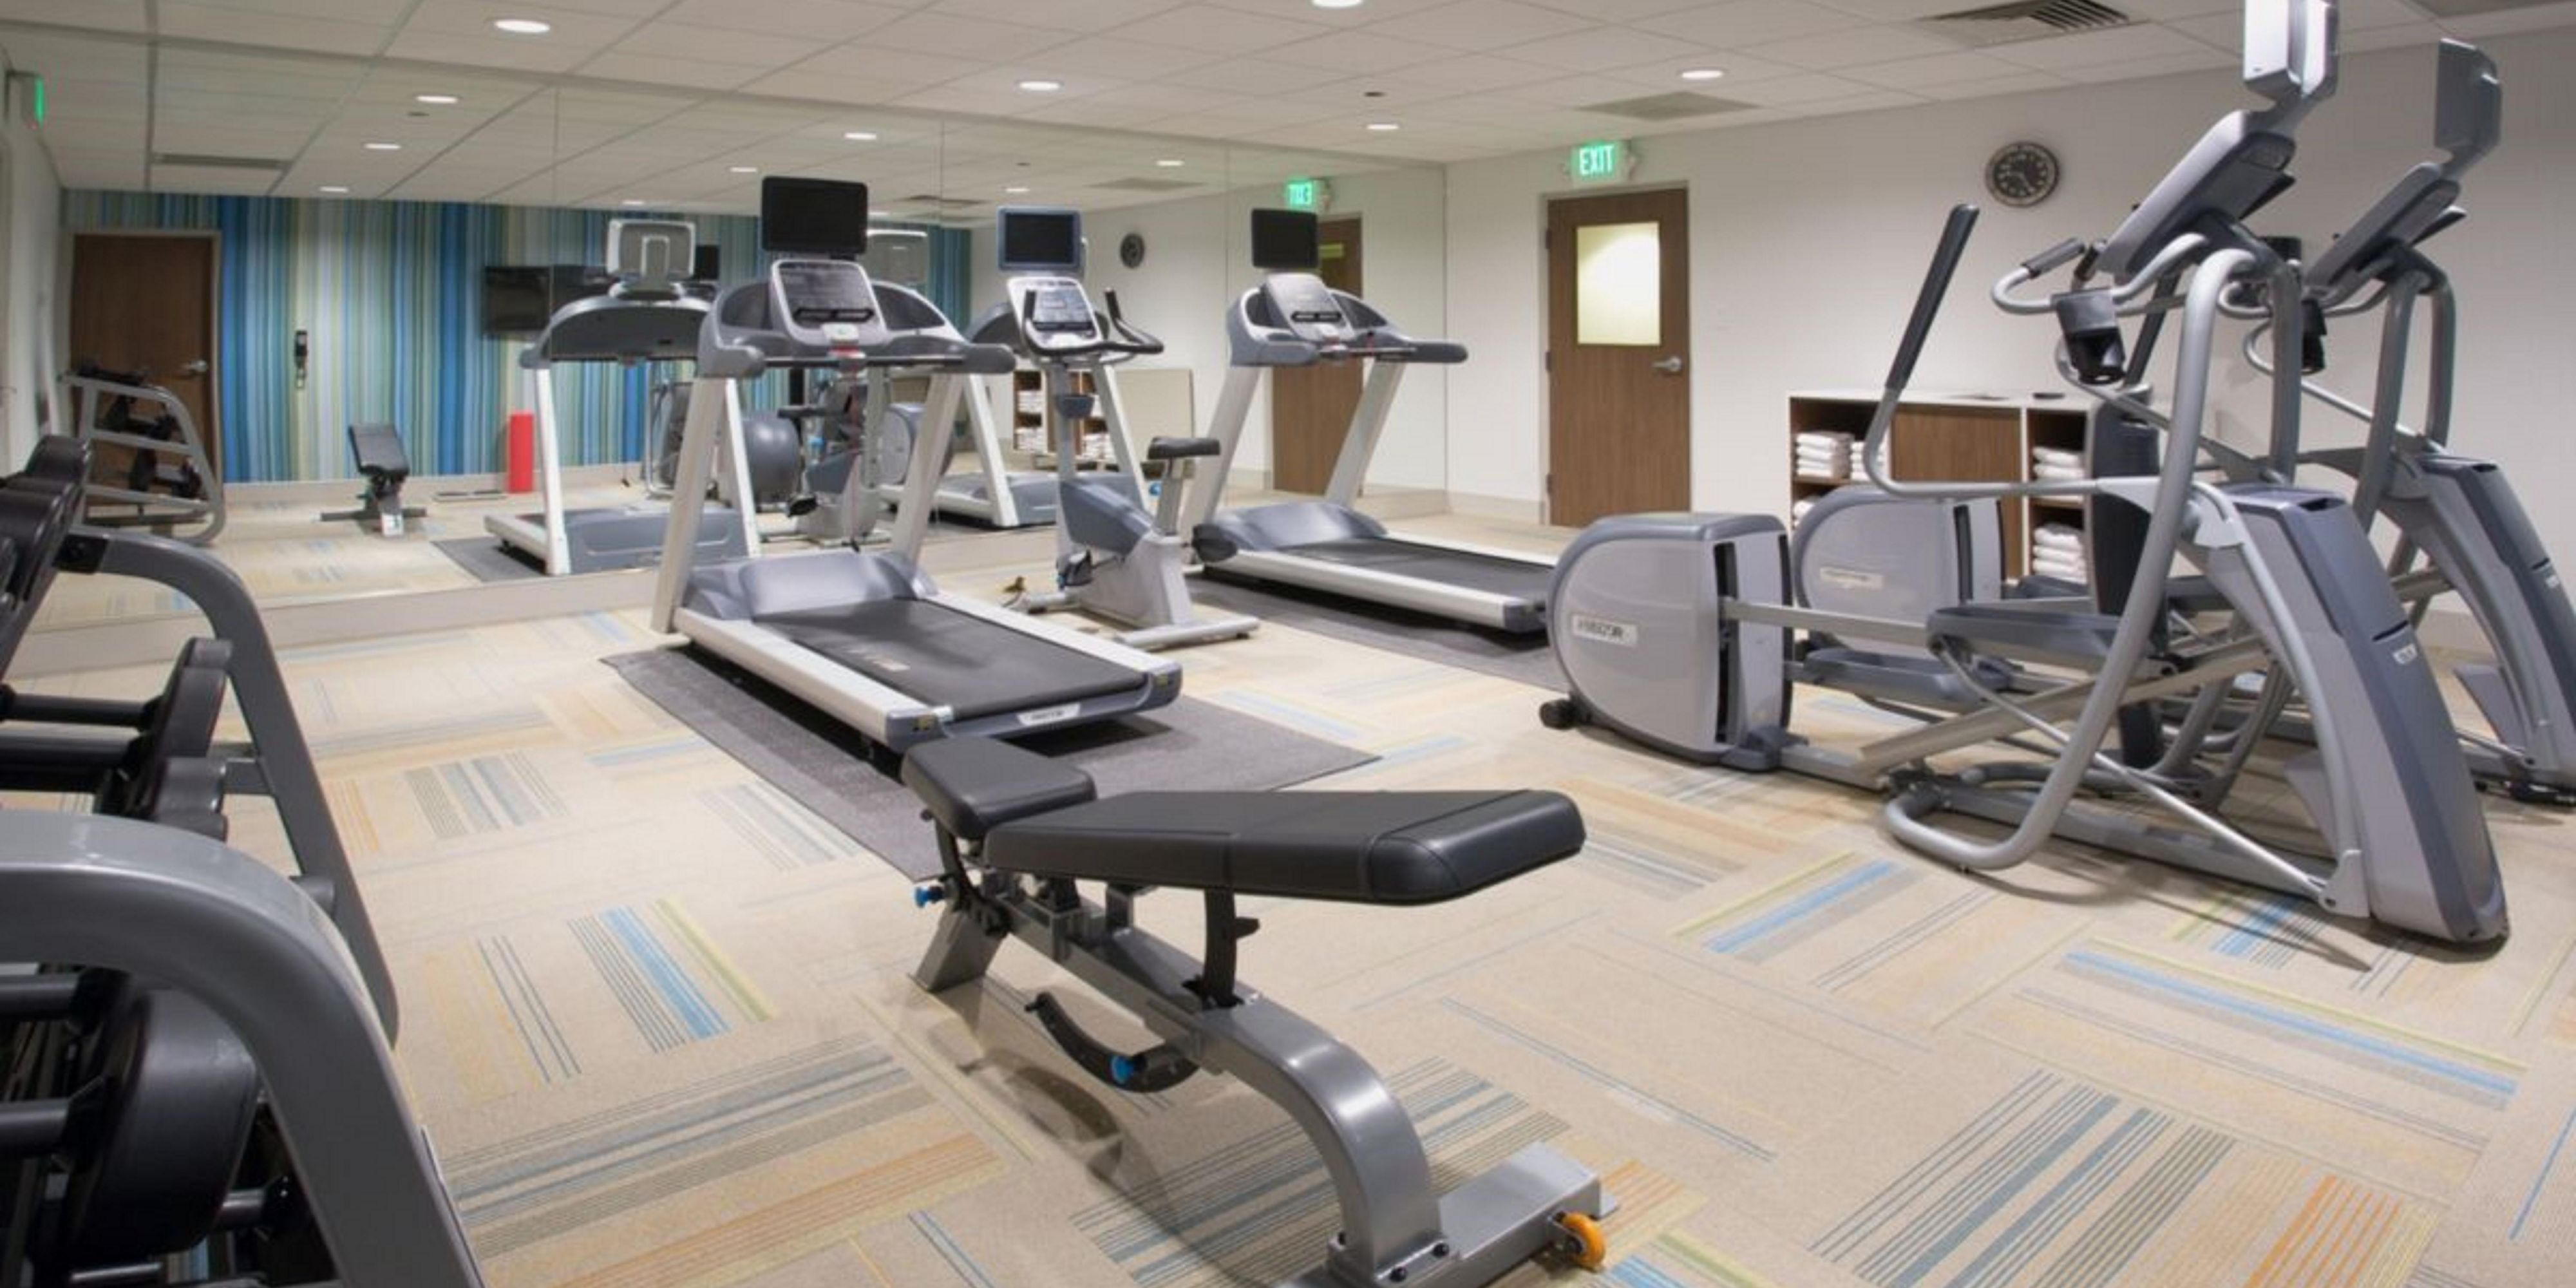 Enjoy our fully equipped fitness center.